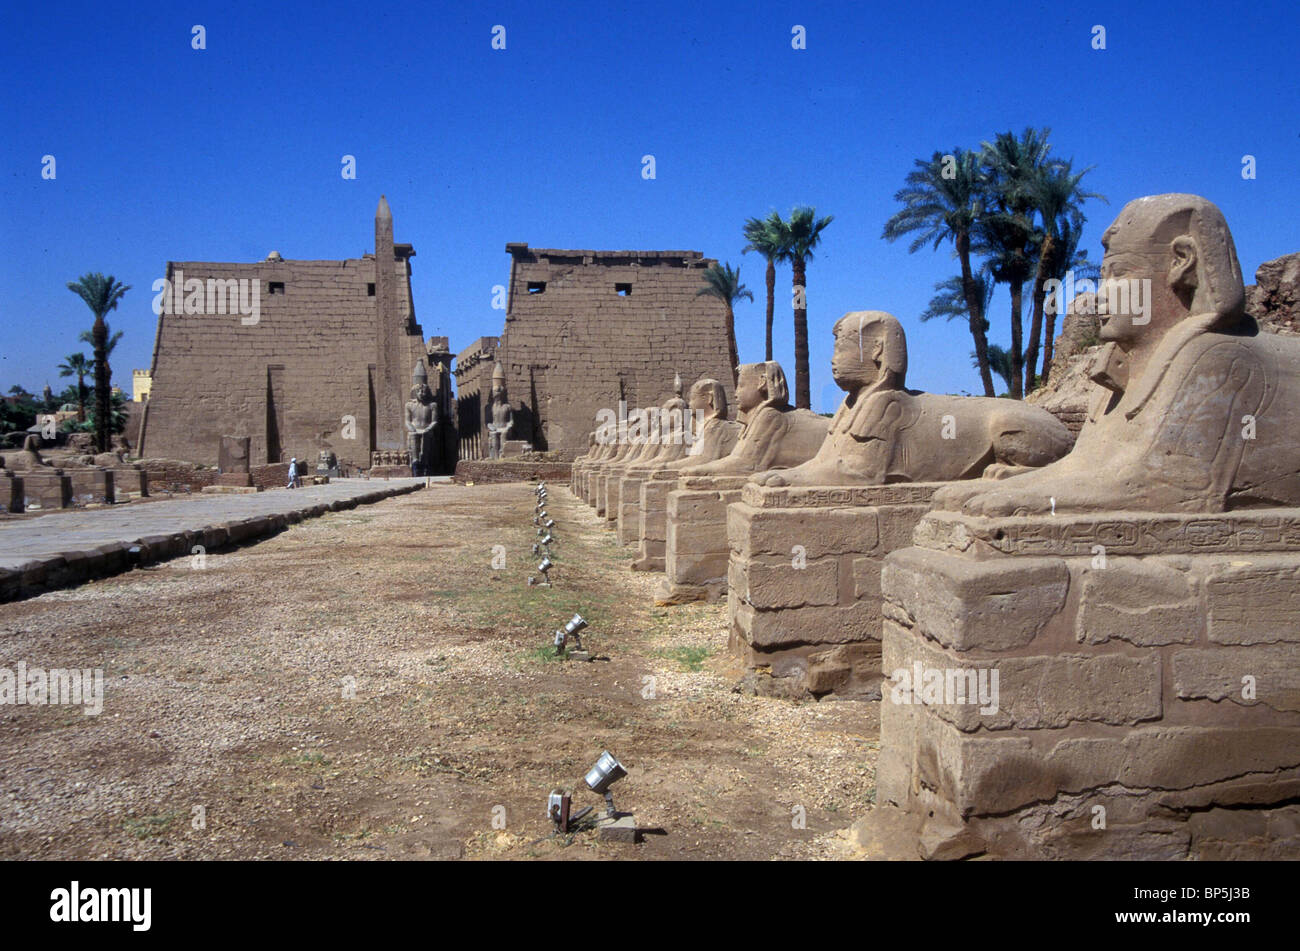 3530. THE MONUMENTAL ENTRANCE TO THE TEMPLE OF LUXOR BUILT BY PHARAOH AMONHOTEP III. AND RAMSES II. (1293-1185 B.C.) Stock Photo